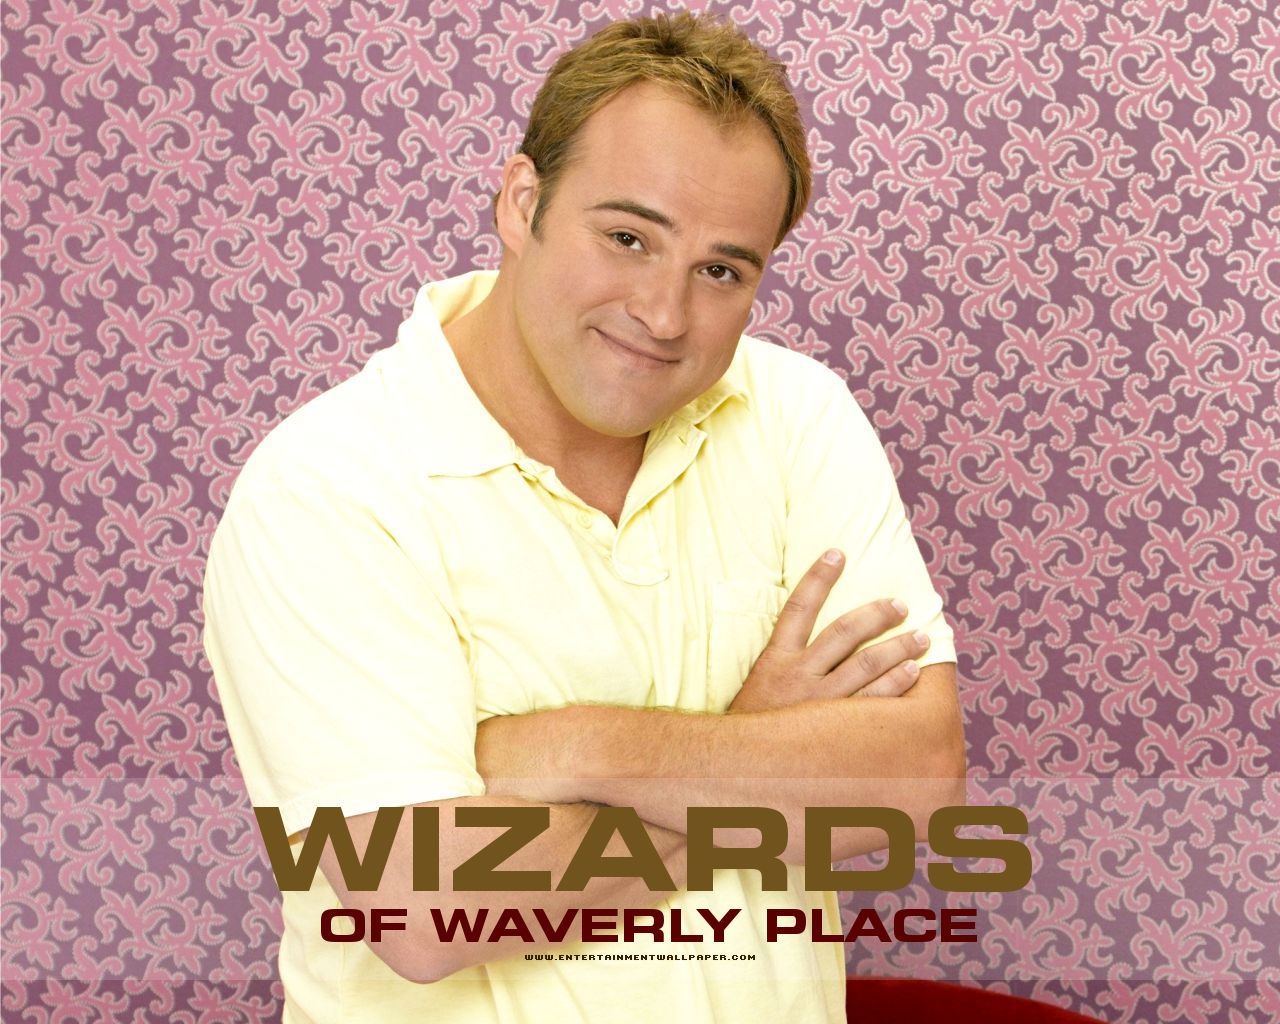 Wizards of Waverly Place 少年魔法師 #15 - 1280x1024